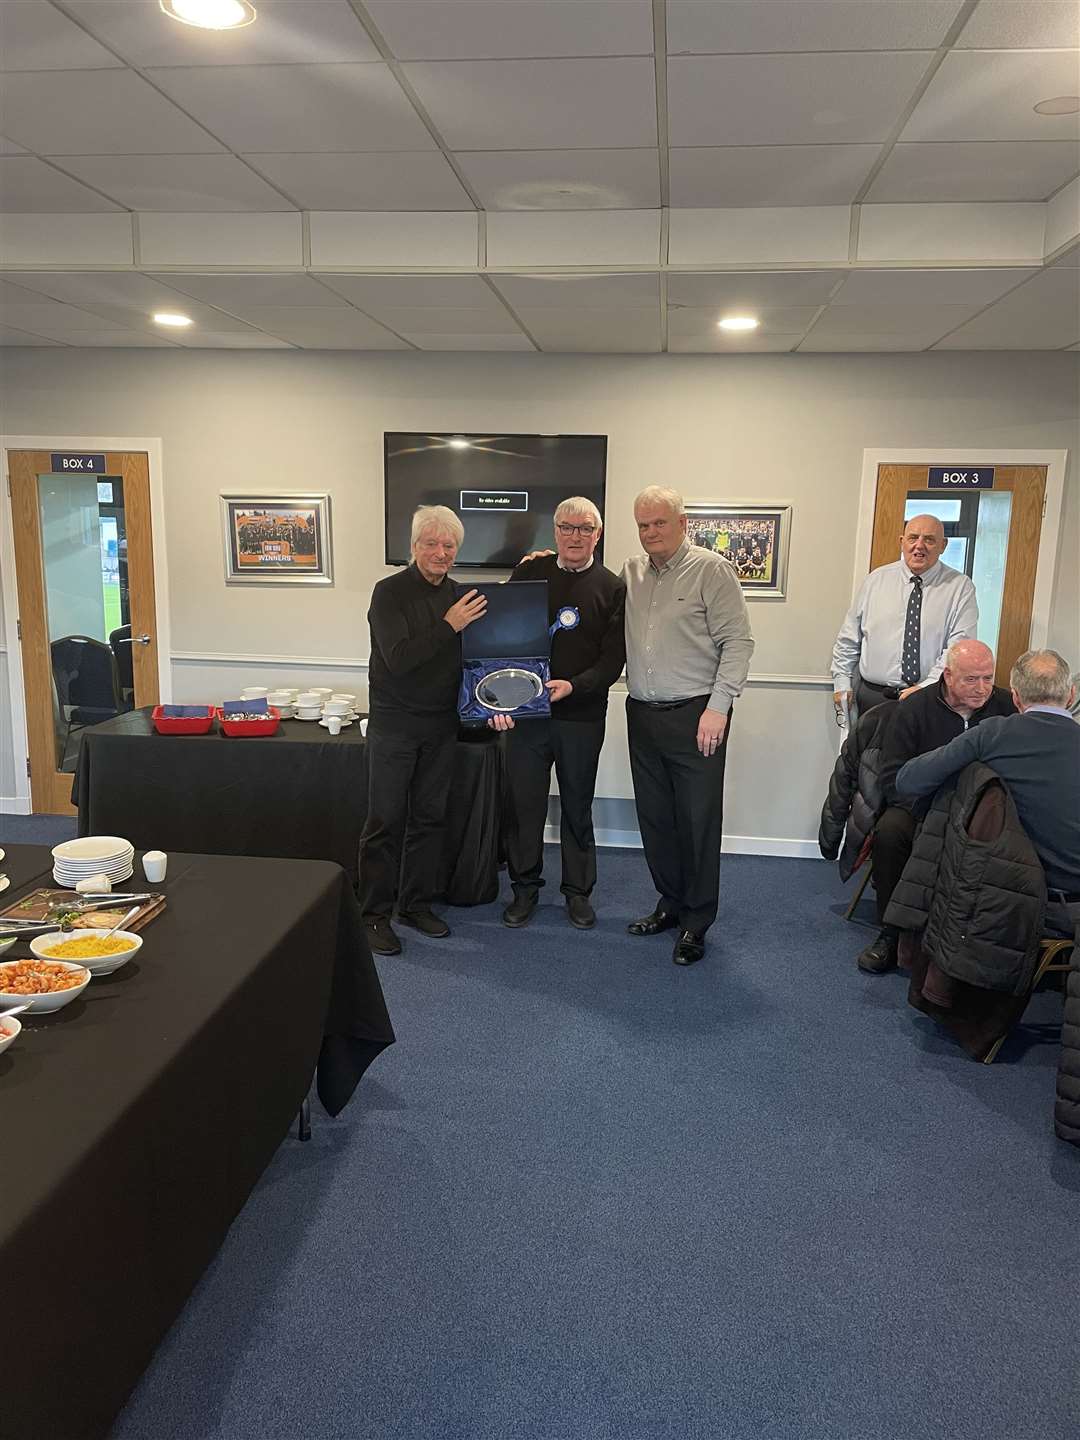 Edwin Skinner receiving award from Jim Oliver and Willie Morgan.